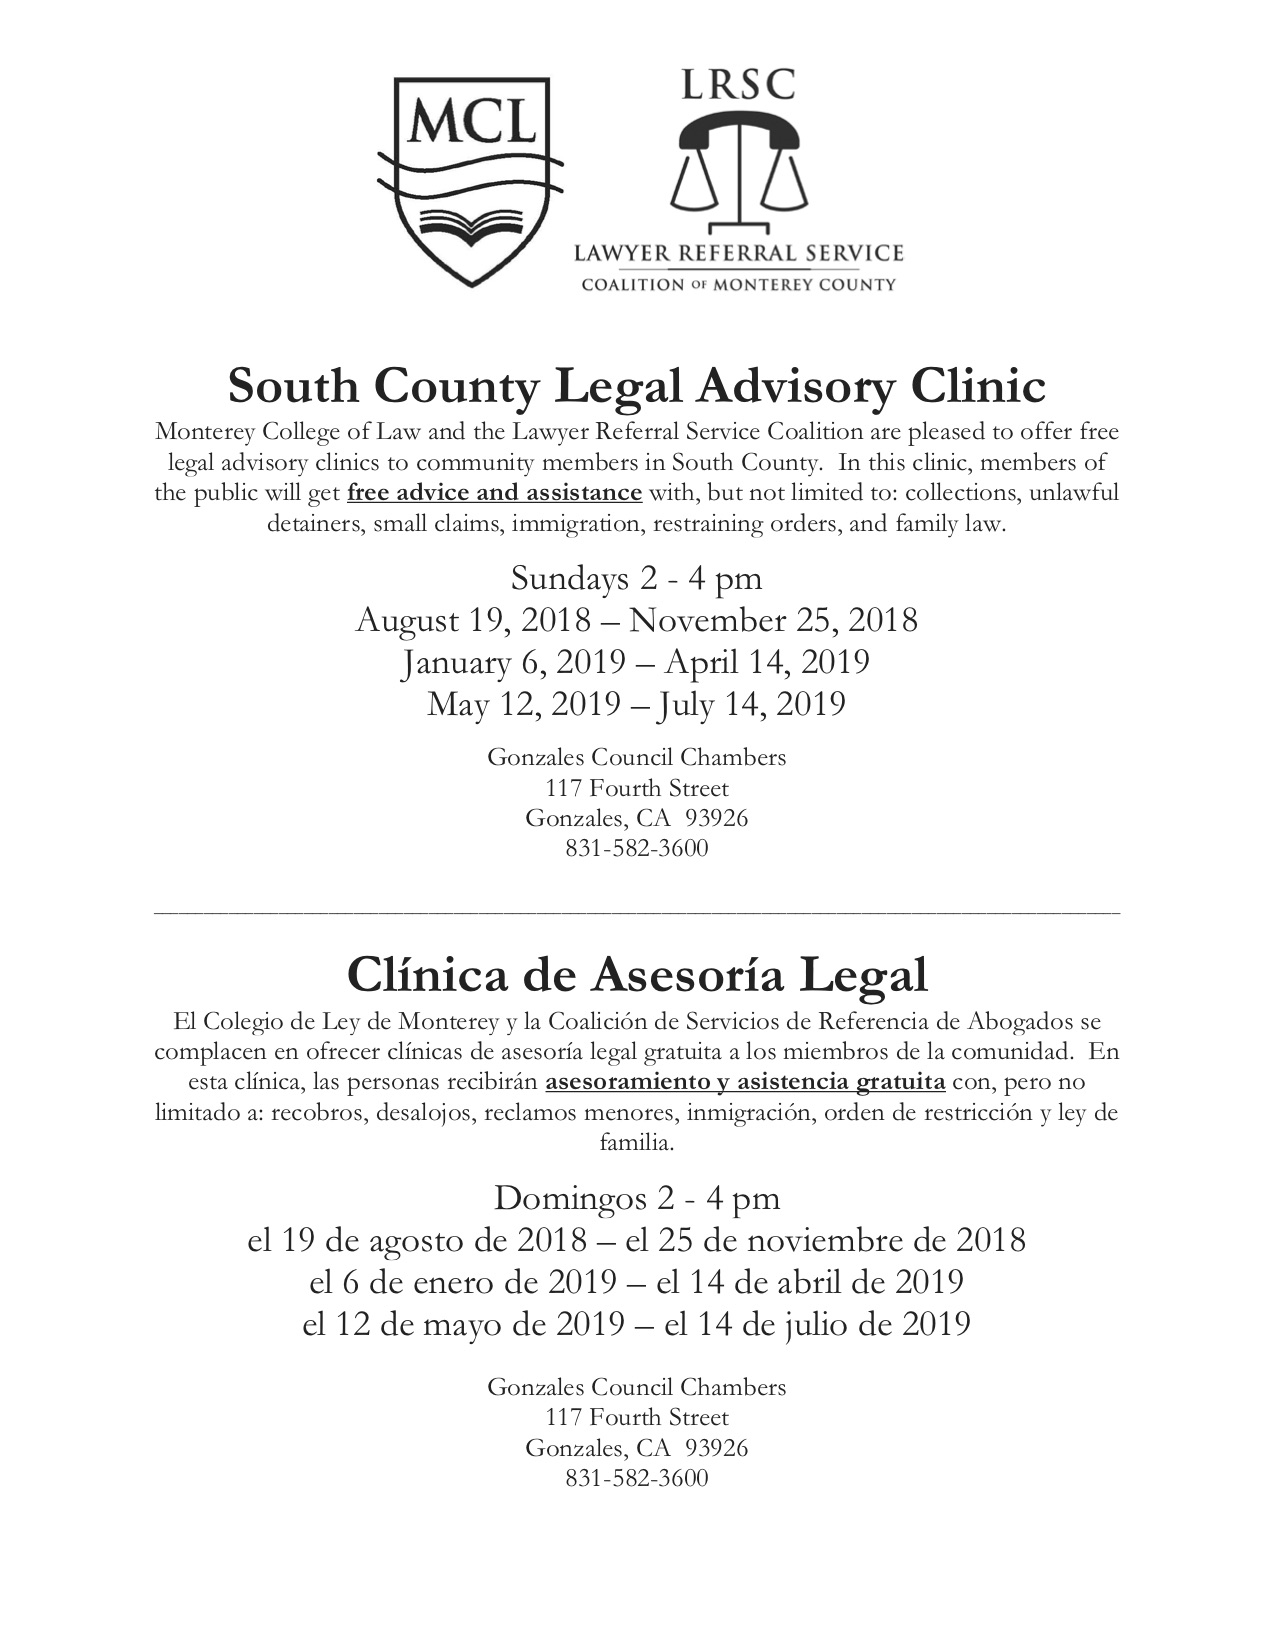 South County Legal Advisory Clinic, Sundays from 2-4 pm in the Gonzales Council Chambers